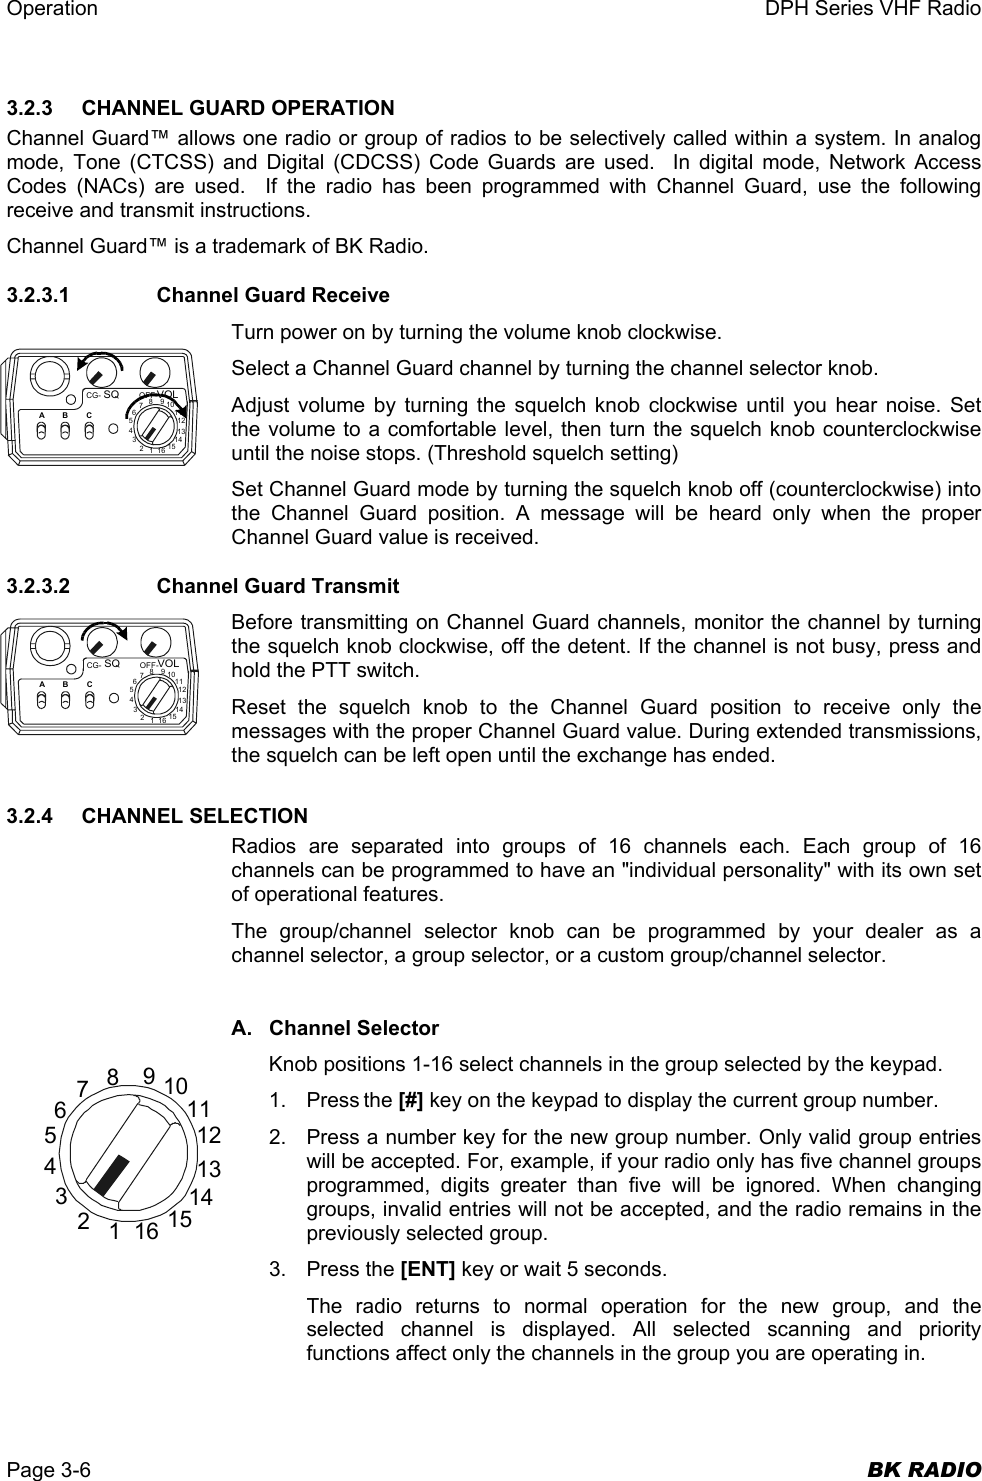 Operation  DPH Series VHF Radio  Page 3-6  BK RADIO 3.2.3    CHANNEL GUARD OPERATION Channel Guard™ allows one radio or group of radios to be selectively called within a system. In analog mode, Tone (CTCSS) and Digital (CDCSS) Code Guards are used.  In digital mode, Network Access Codes (NACs) are used.  If the radio has been programmed with Channel Guard, use the following receive and transmit instructions. Channel Guard™ is a trademark of BK Radio. 3.2.3.1    Channel Guard Receive Turn power on by turning the volume knob clockwise. Select a Channel Guard channel by turning the channel selector knob.  Adjust volume by turning the squelch knob clockwise until you hear noise. Set the volume to a comfortable level, then turn the squelch knob counterclockwise until the noise stops. (Threshold squelch setting) Set Channel Guard mode by turning the squelch knob off (counterclockwise) into the Channel Guard position. A message will be heard only when the proper Channel Guard value is received. 3.2.3.2    Channel Guard Transmit Before transmitting on Channel Guard channels, monitor the channel by turning the squelch knob clockwise, off the detent. If the channel is not busy, press and hold the PTT switch. Reset the squelch knob to the Channel Guard position to receive only the messages with the proper Channel Guard value. During extended transmissions, the squelch can be left open until the exchange has ended. 3.2.4 CHANNEL SELECTION Radios are separated into groups of 16 channels each. Each group of 16 channels can be programmed to have an &quot;individual personality&quot; with its own set of operational features. The group/channel selector knob can be programmed by your dealer as a channel selector, a group selector, or a custom group/channel selector.  A. Channel Selector Knob positions 1-16 select channels in the group selected by the keypad. 1. Press the [#] key on the keypad to display the current group number. 2.  Press a number key for the new group number. Only valid group entries will be accepted. For, example, if your radio only has five channel groups programmed, digits greater than five will be ignored. When changing groups, invalid entries will not be accepted, and the radio remains in the previously selected group. 3. Press the [ENT] key or wait 5 seconds. The radio returns to normal operation for the new group, and the selected channel is displayed. All selected scanning and priority functions affect only the channels in the group you are operating in.  16123456789101112131415CG- OFF-SQ VOL16123456789101112131415ABCCG- OFF-SQ VOL16123456789101112131415ABC